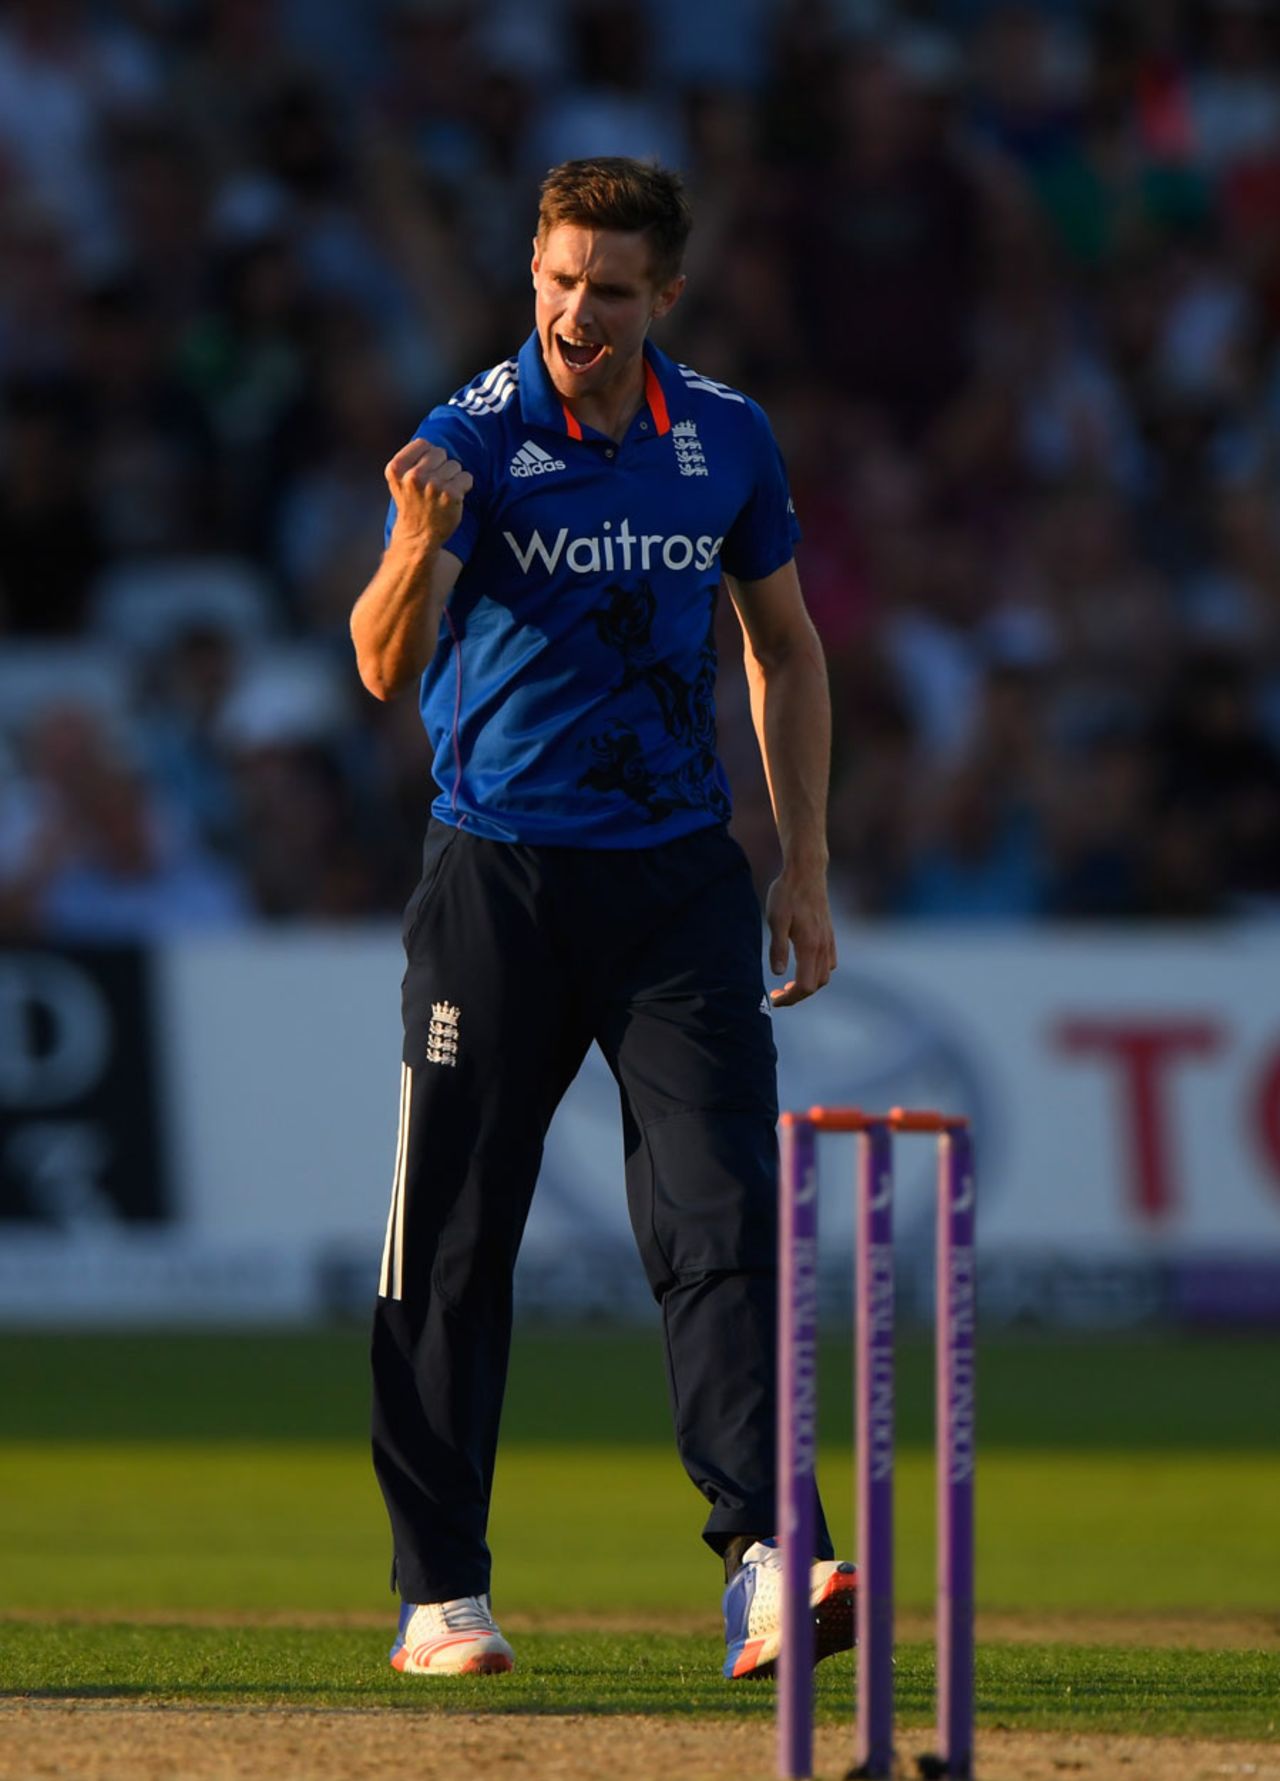 Chris Woakes struck three times in his opening spell, England v Pakistan, 3rd ODI, Trent Bridge, August 30, 2016